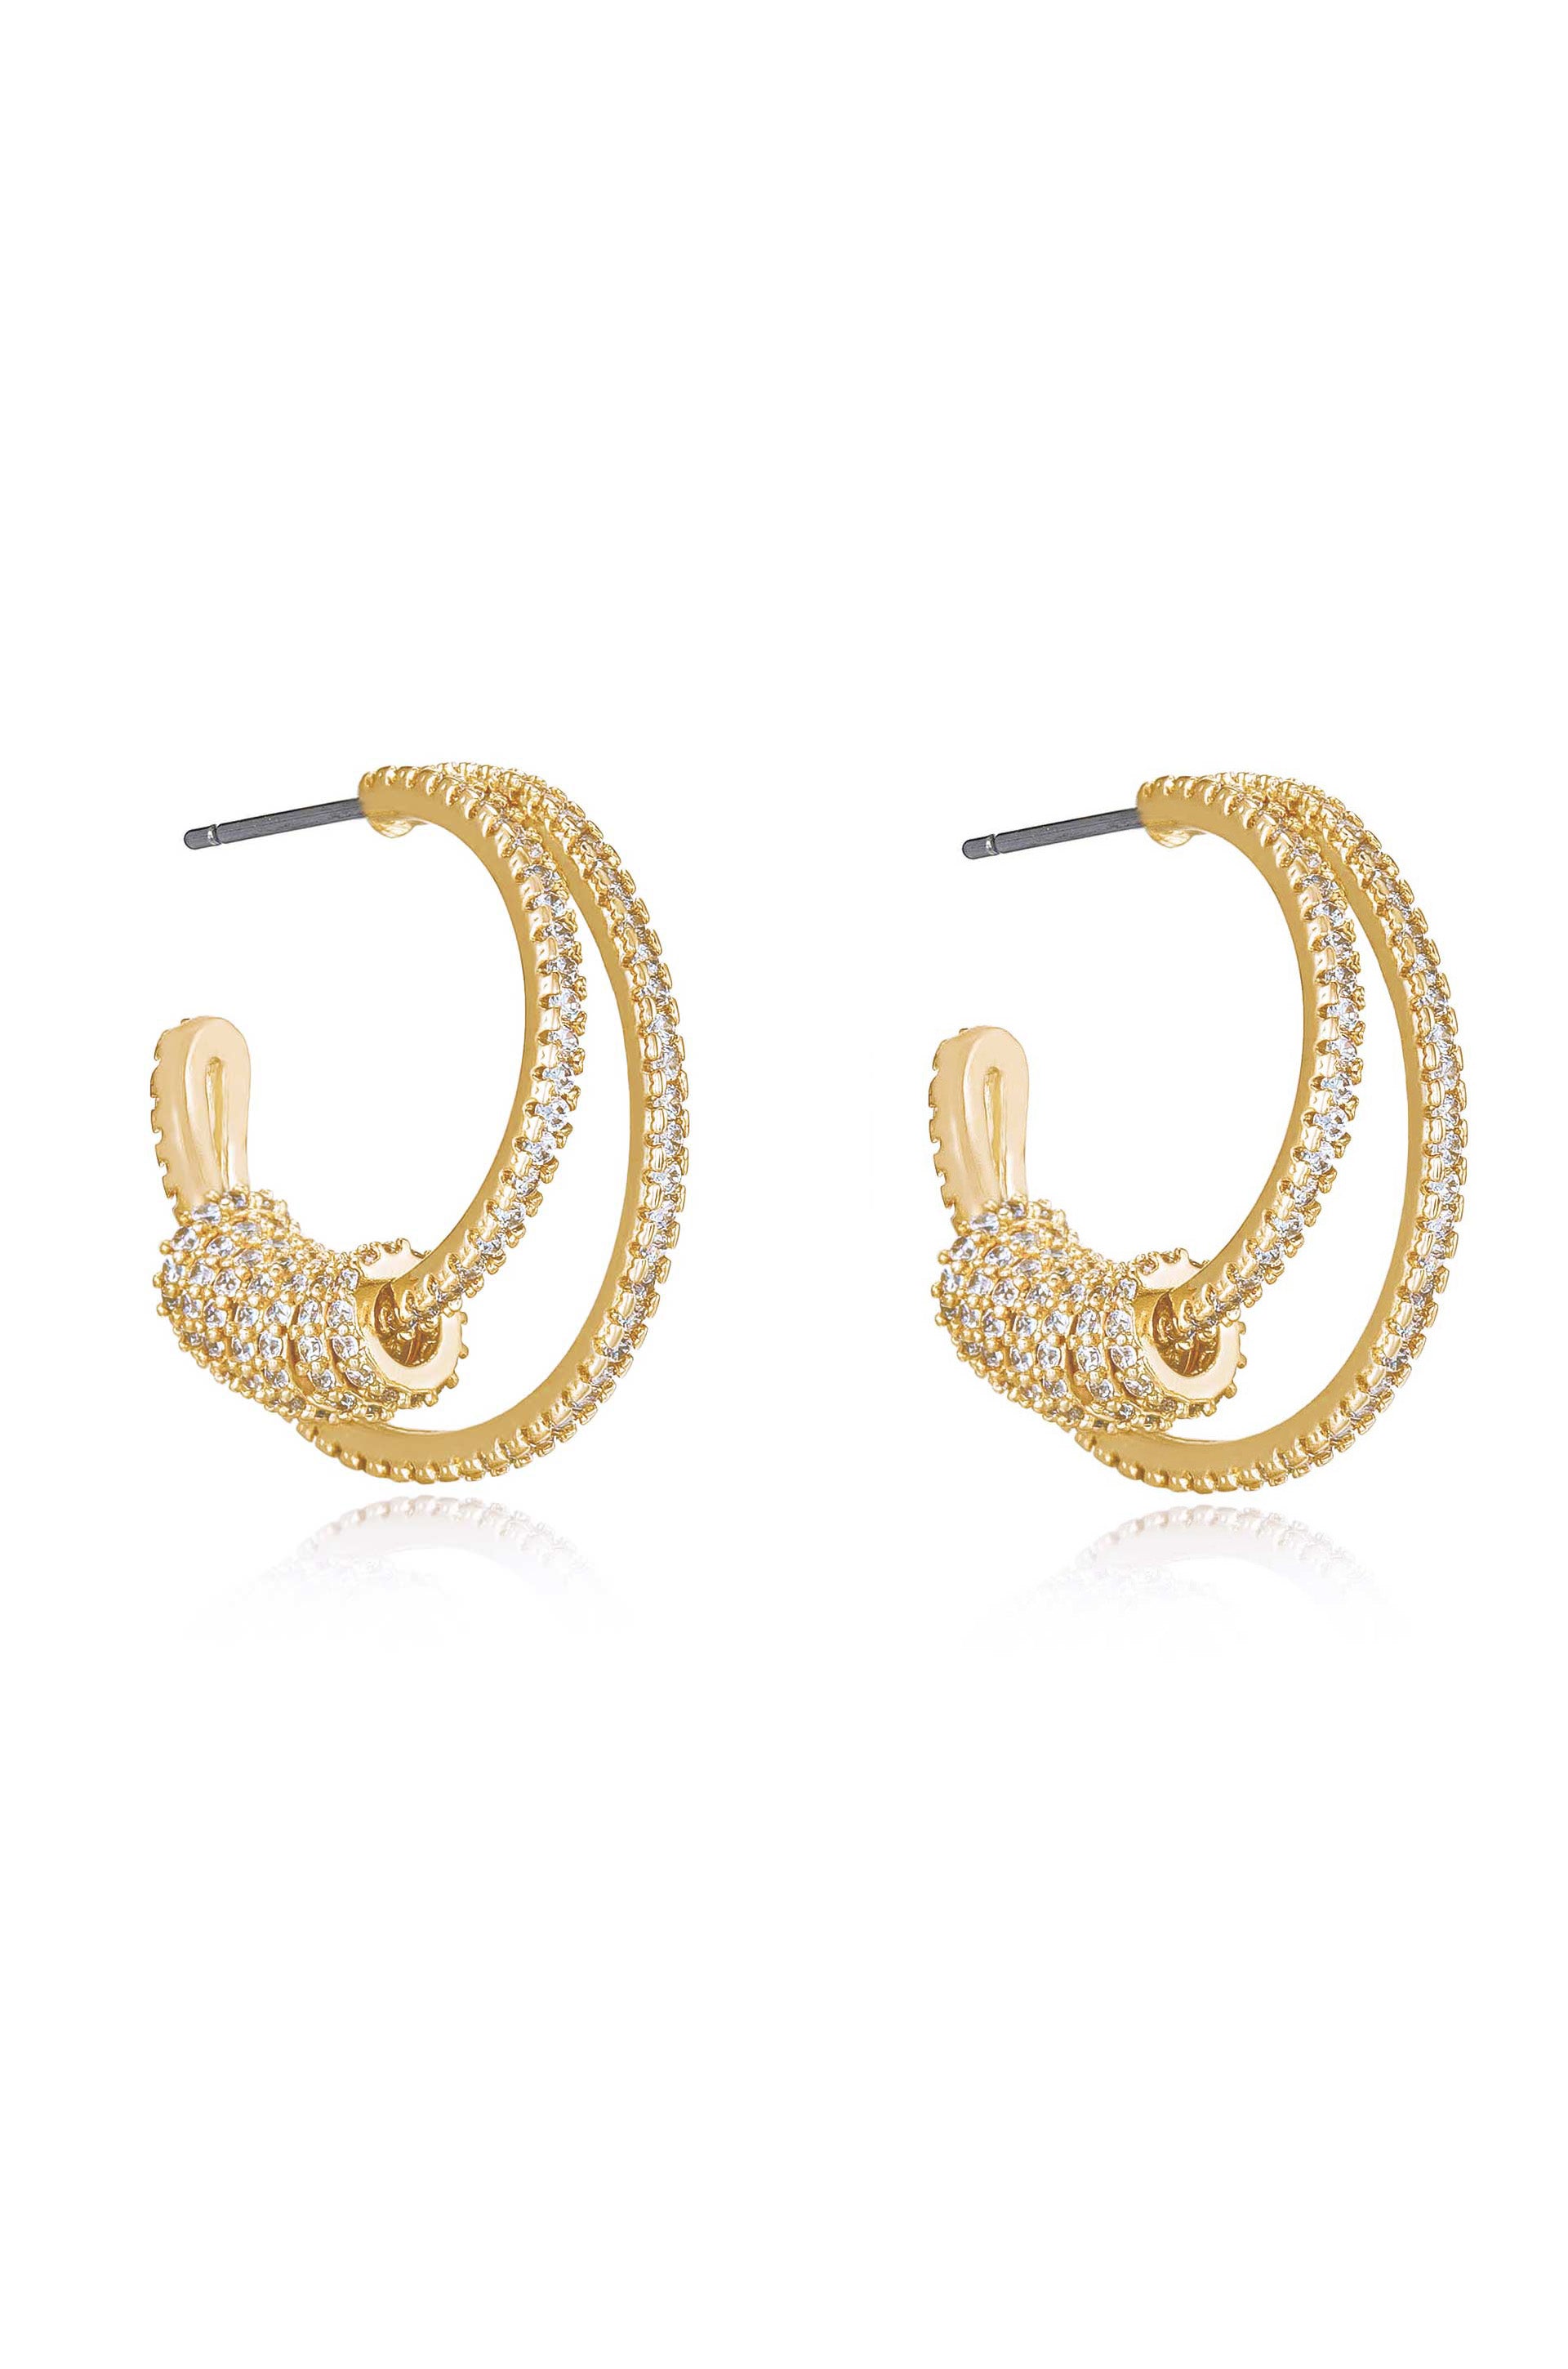 Double Crystal Pave Ring 18k Gold Plated Hoop Earrings side